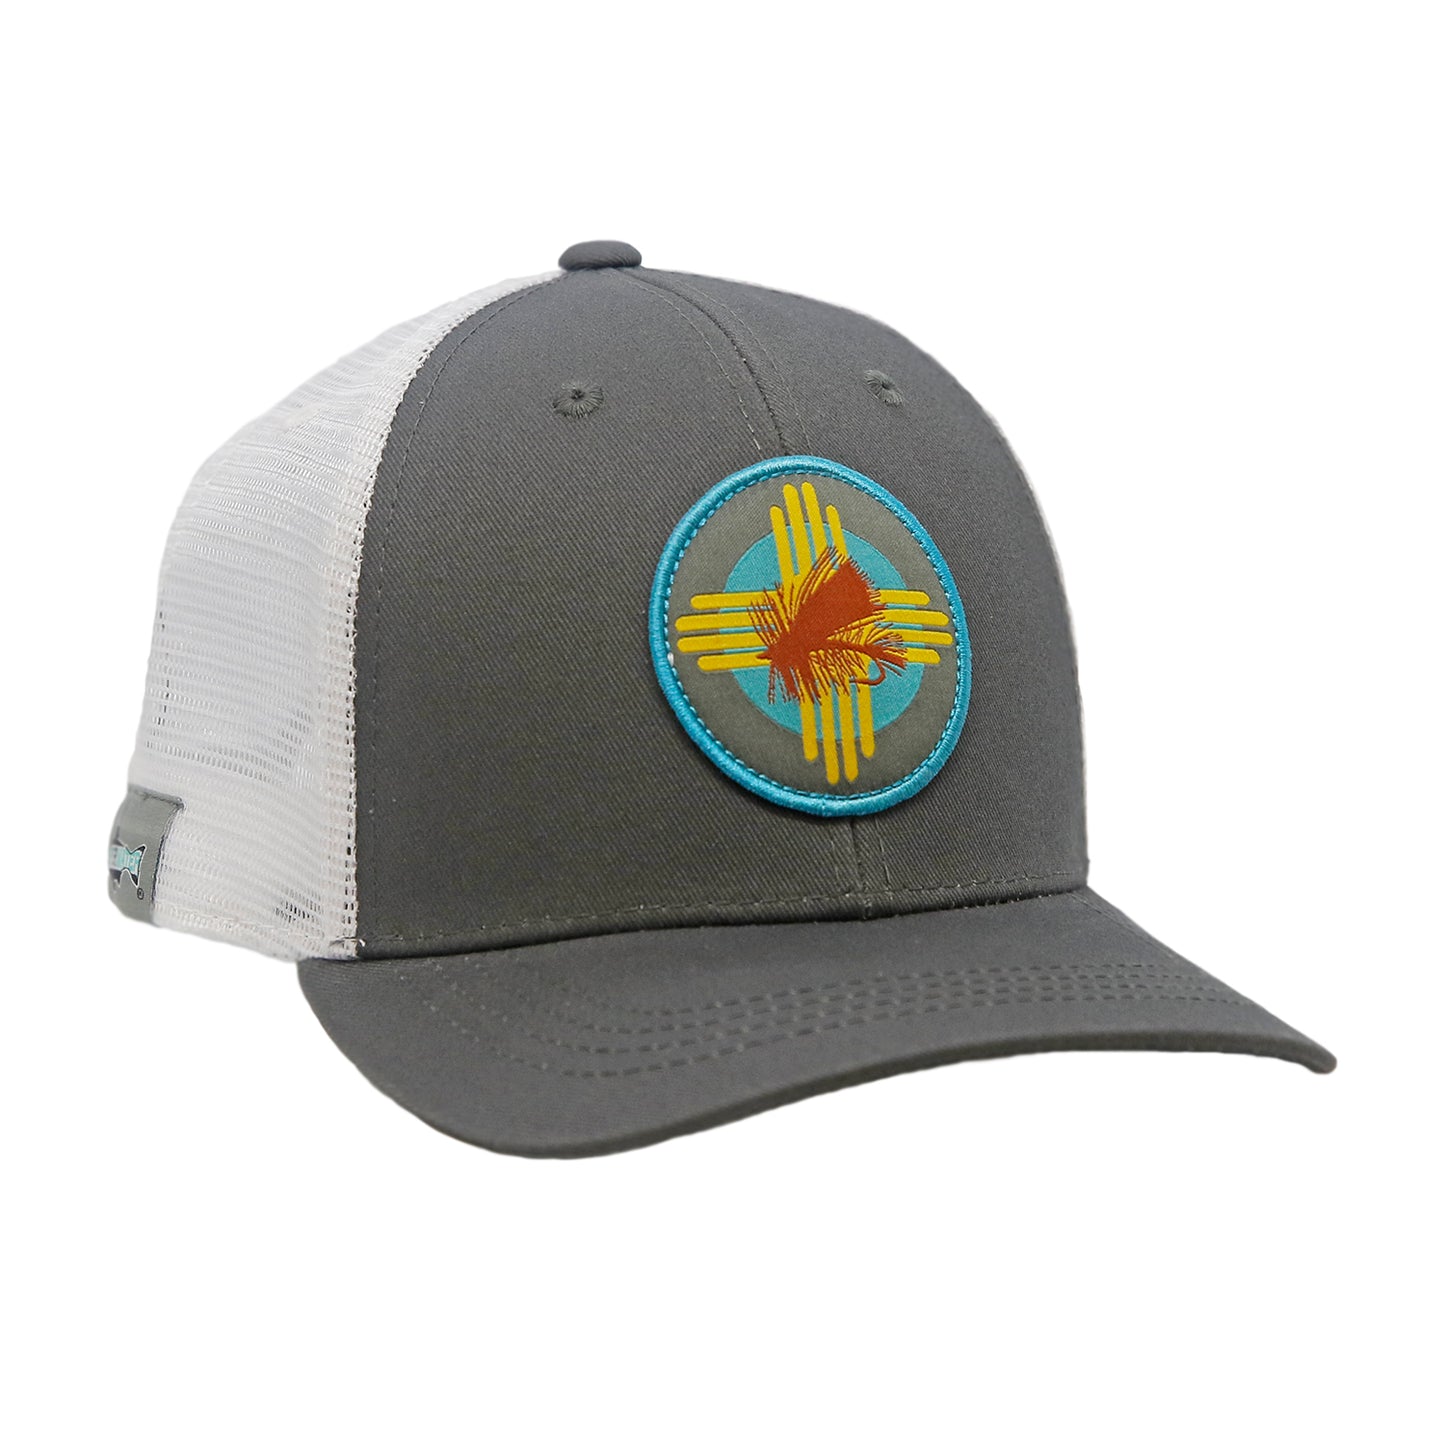 A hat with white mesh in back and gray fabric in front has a circular patch featuring a dry fly and a zia symbol